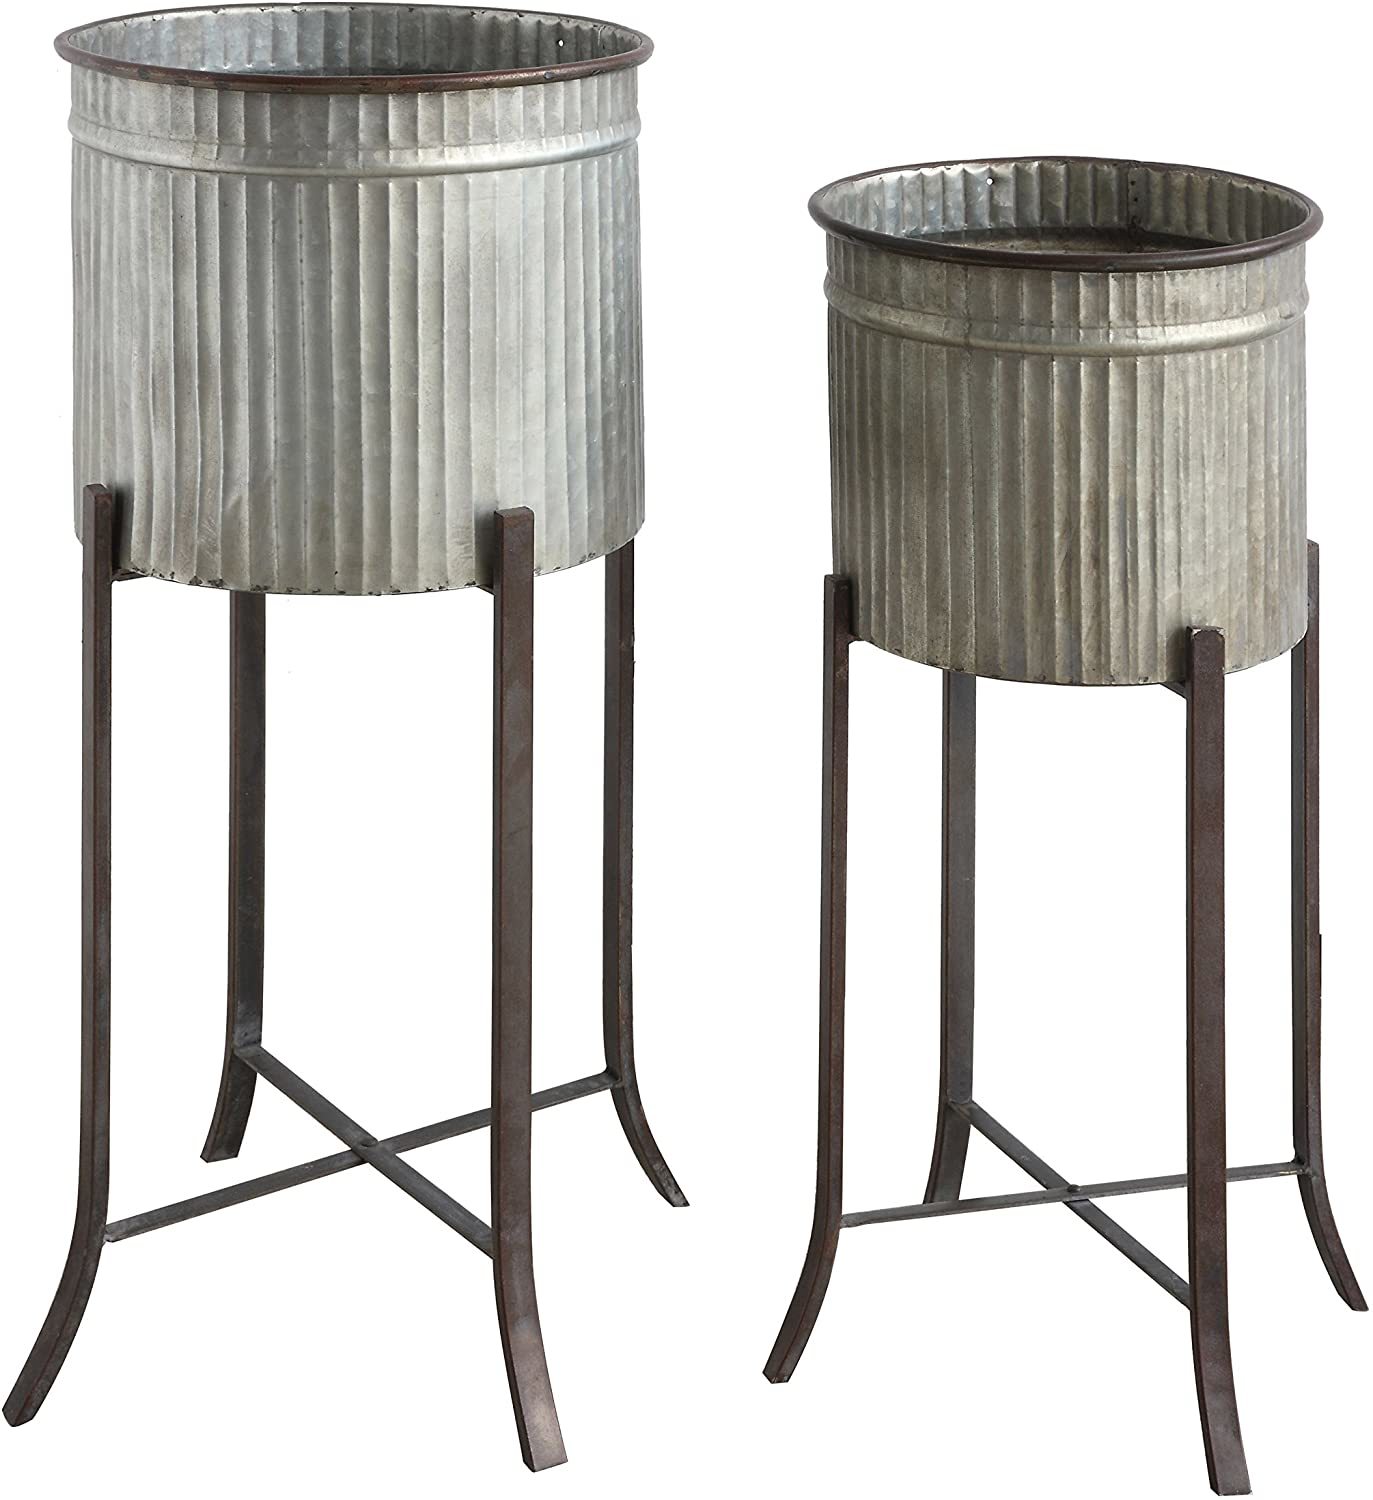 Creative Co-Op Corrugated Metal Planters on Stands (Set of 2 Sizes), Silver, 2 - $130.99